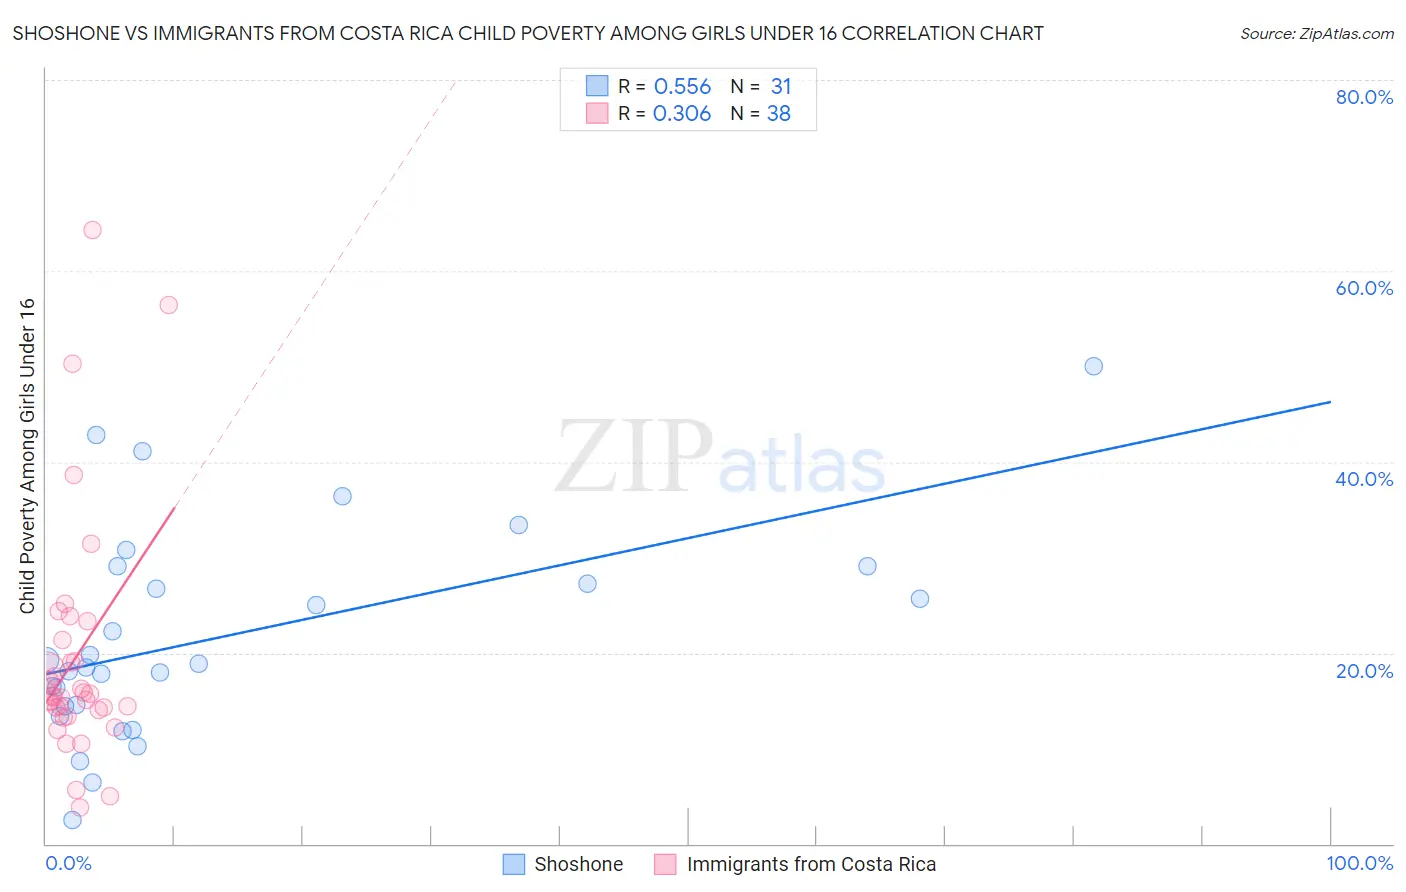 Shoshone vs Immigrants from Costa Rica Child Poverty Among Girls Under 16